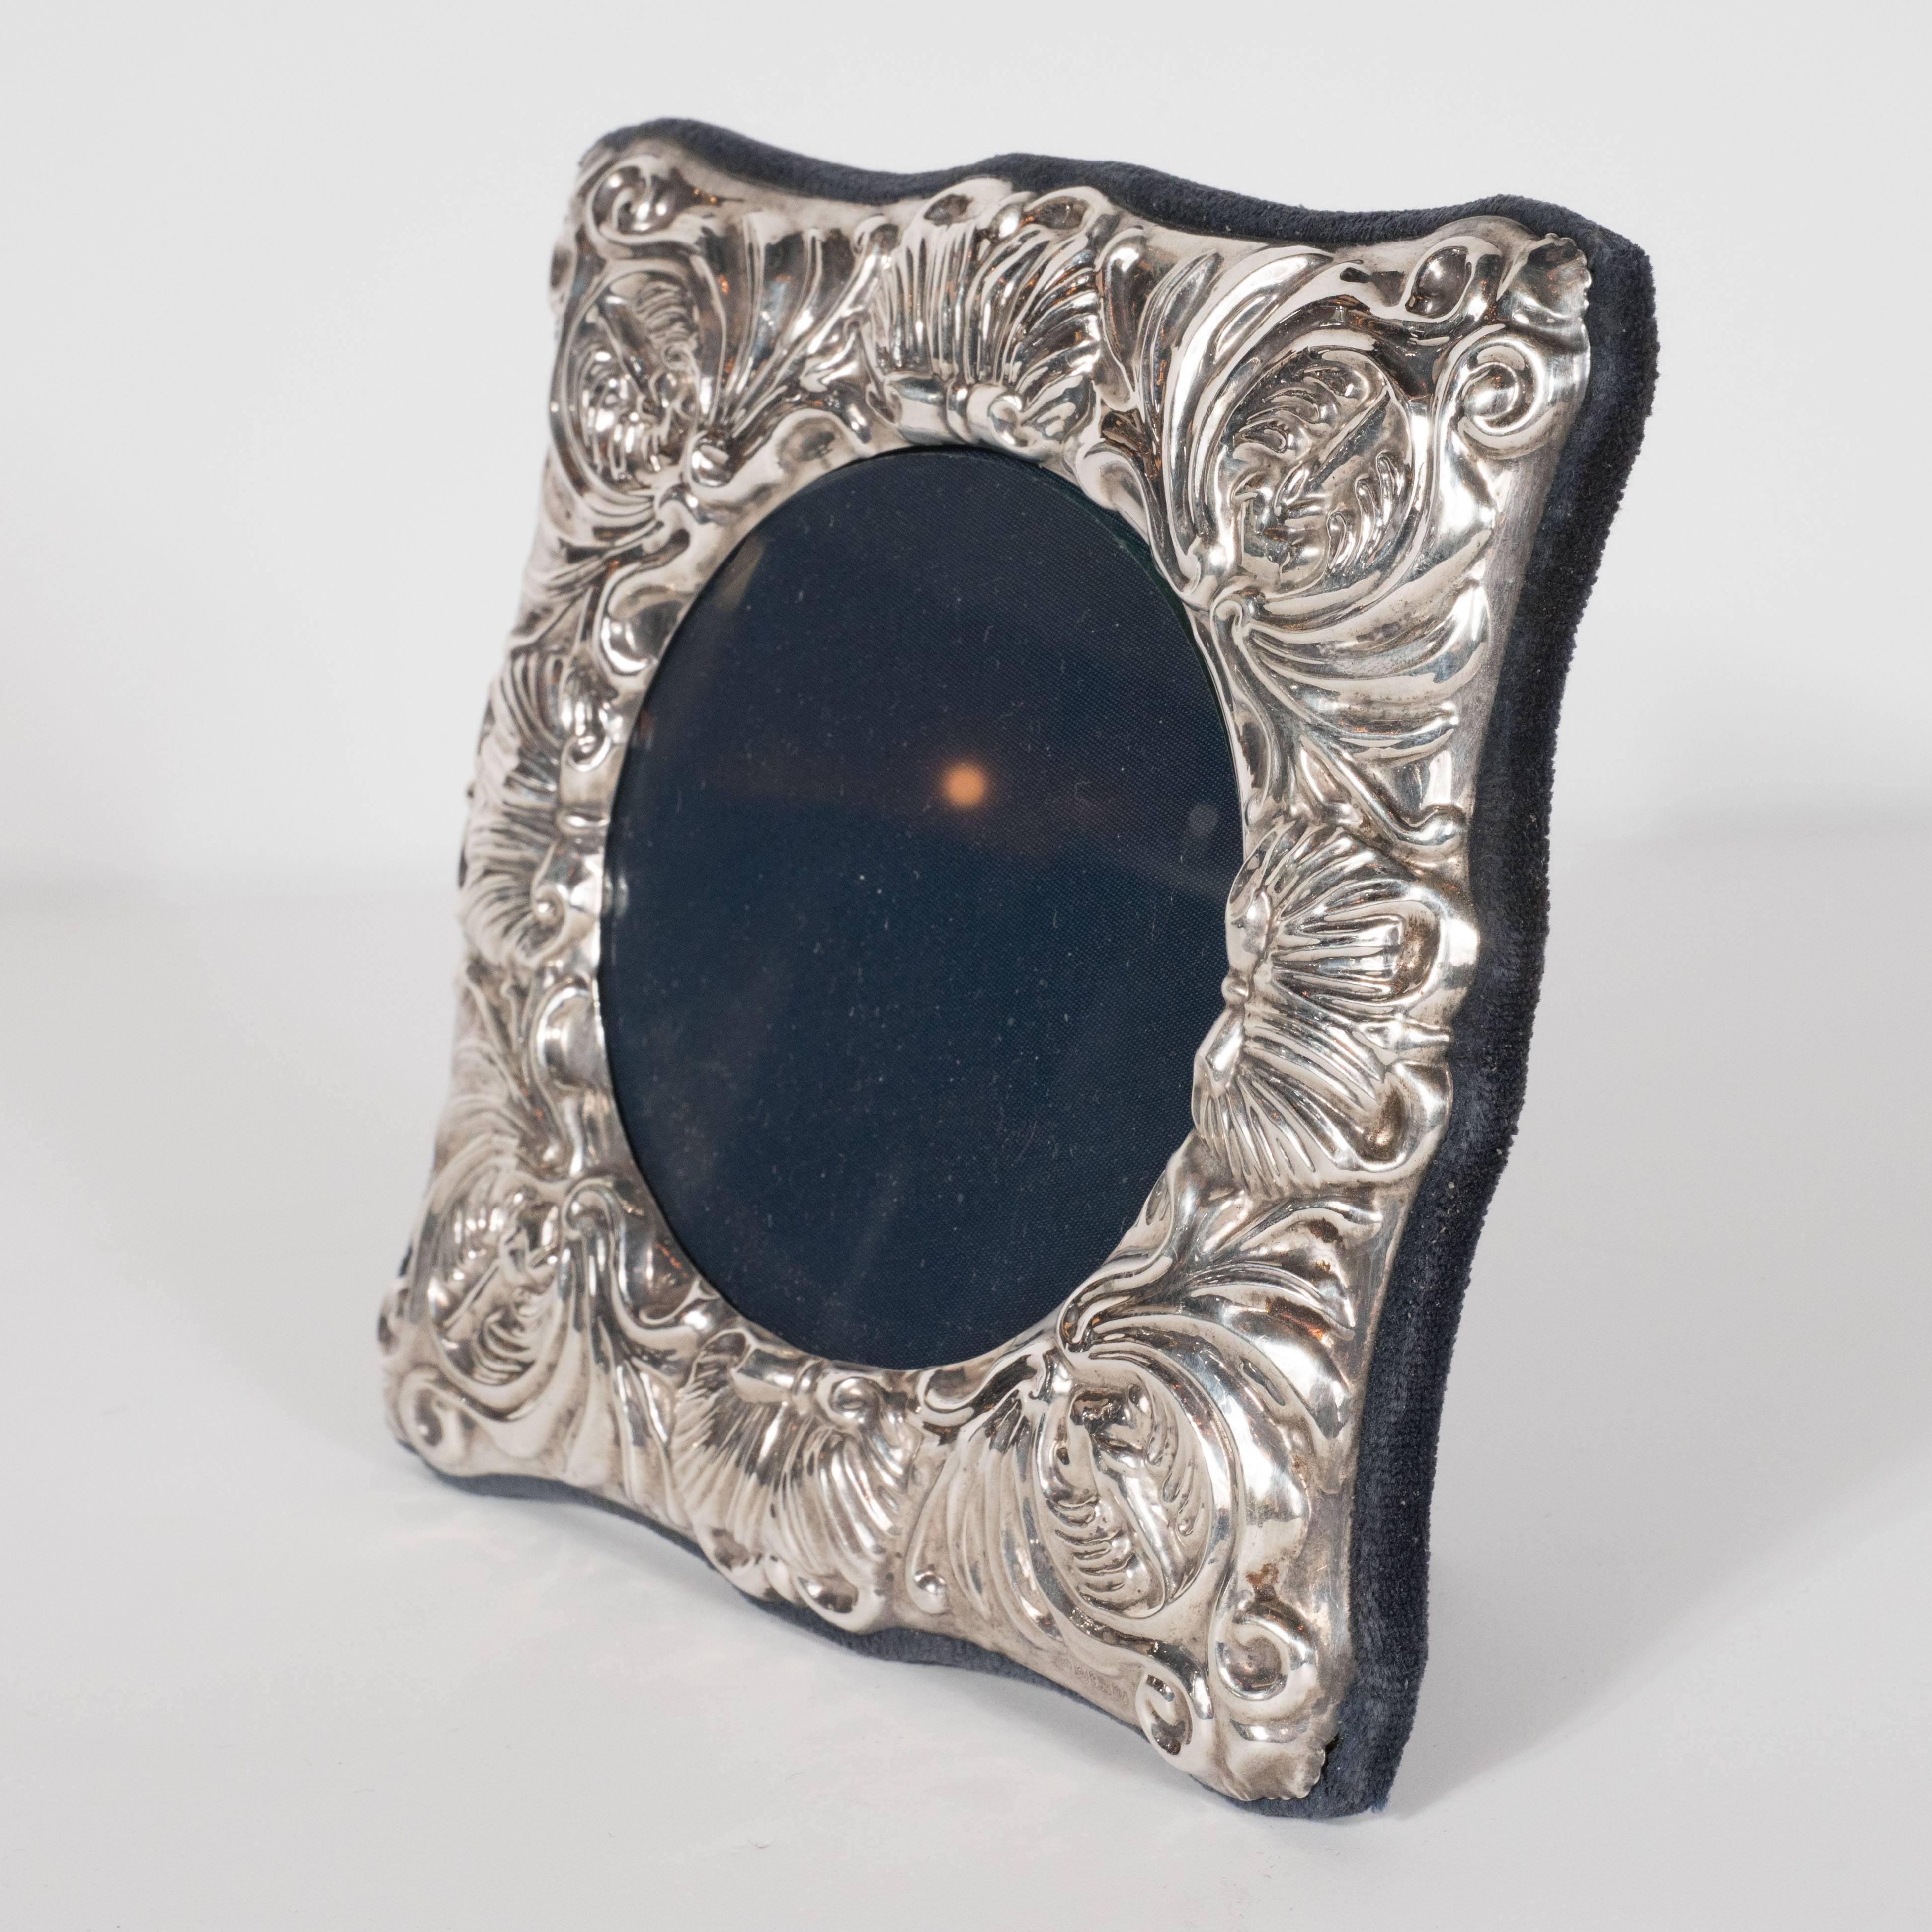 This charming picture frame features a circular glass sheet in the centre, surrounded on all sides by Baroque detailing in sterling silver repoussé. The back is composed of midnight blue velvet. This is a fine example of English sterling, not to